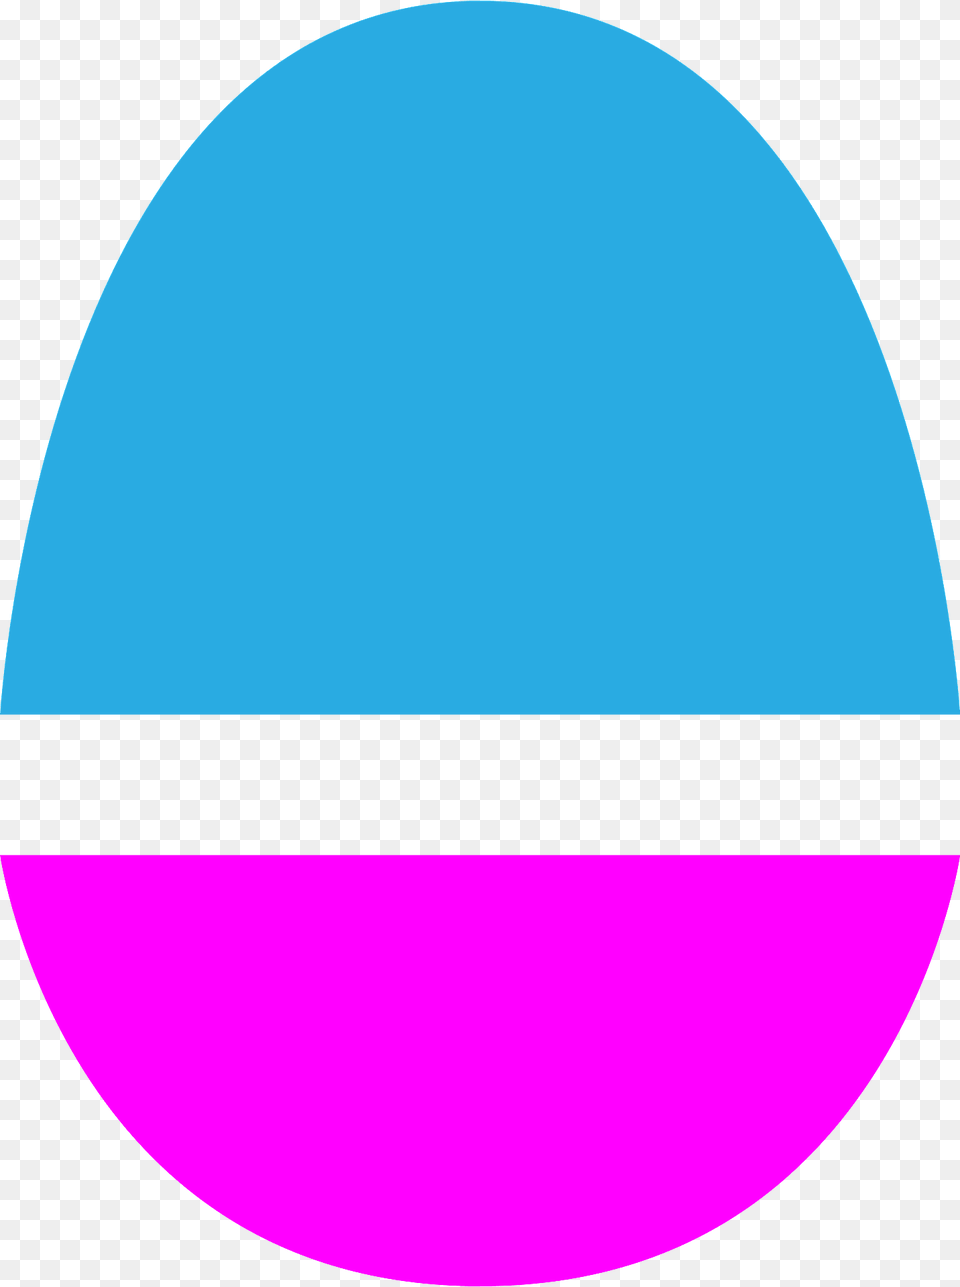 Magenta And Blue Easter Egg Clipart, Sphere, Oval Png Image